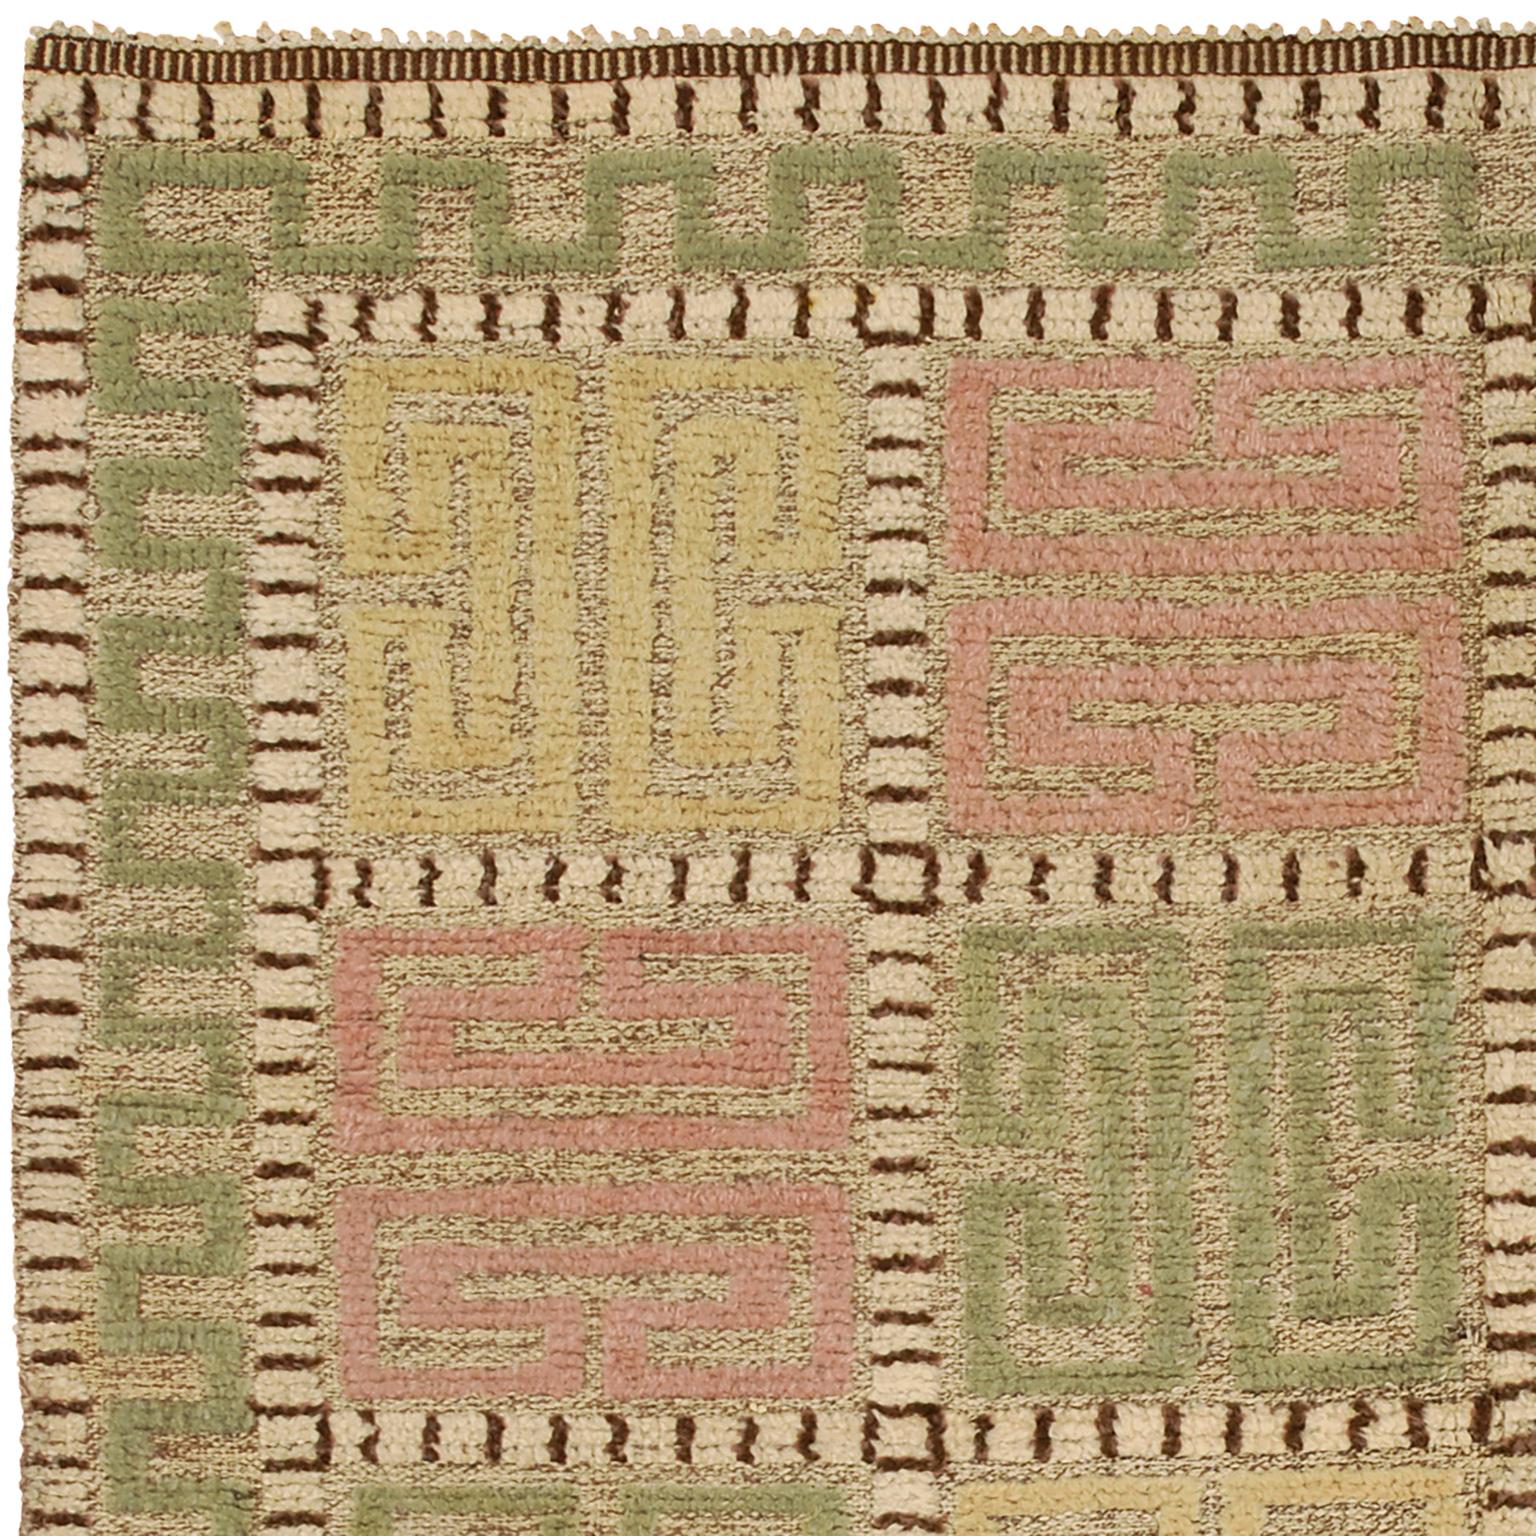 Hand-Woven Mid-20th Century Swedish Pile Rug For Sale